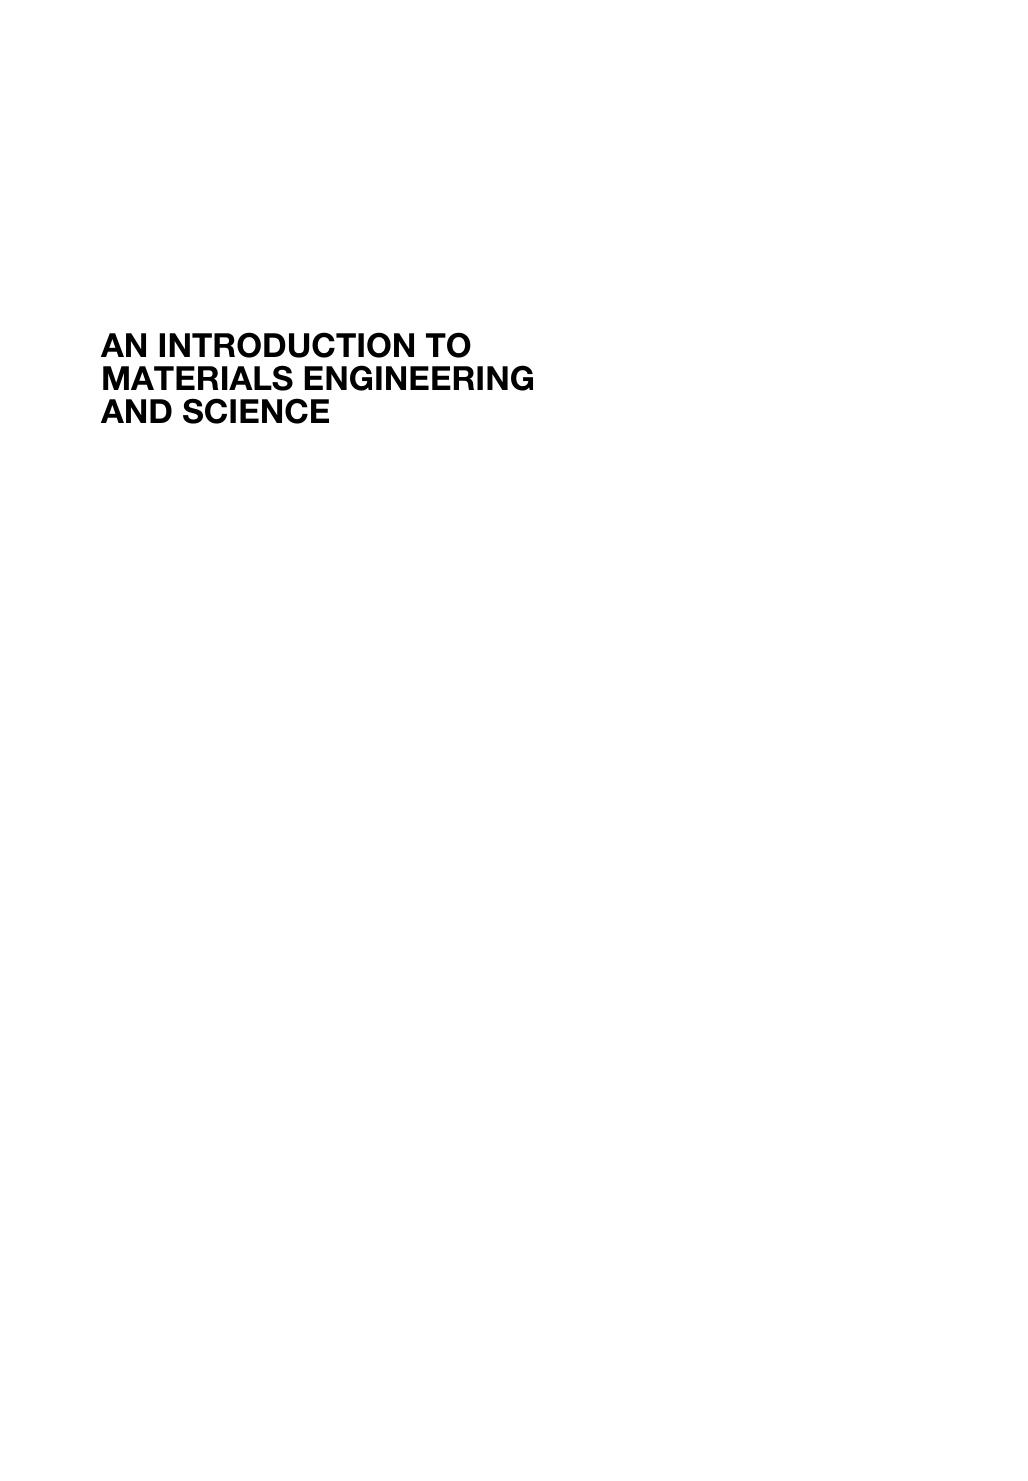 An Introduction to Materials Engineering and Science                                                    2004